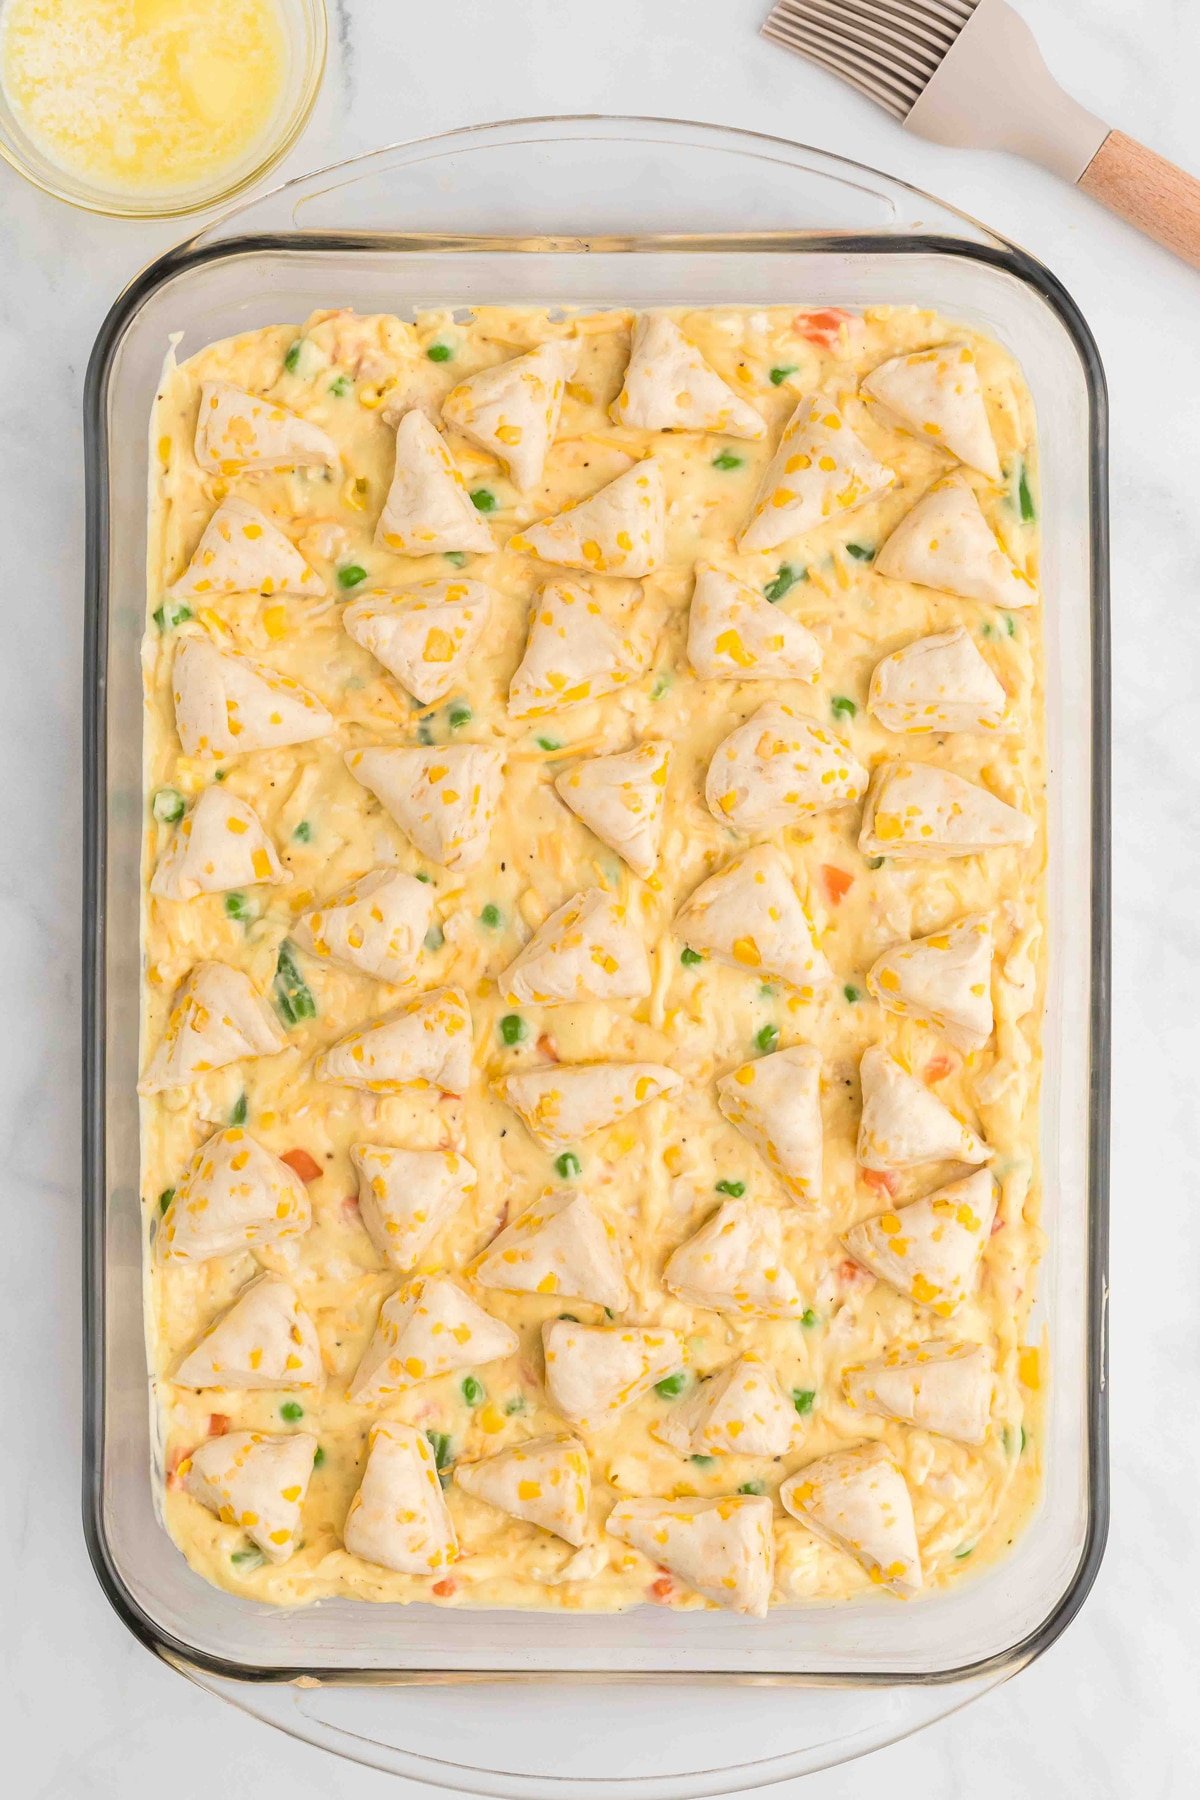 Chicken pot pie filling topped with biscuits in a casserole dish